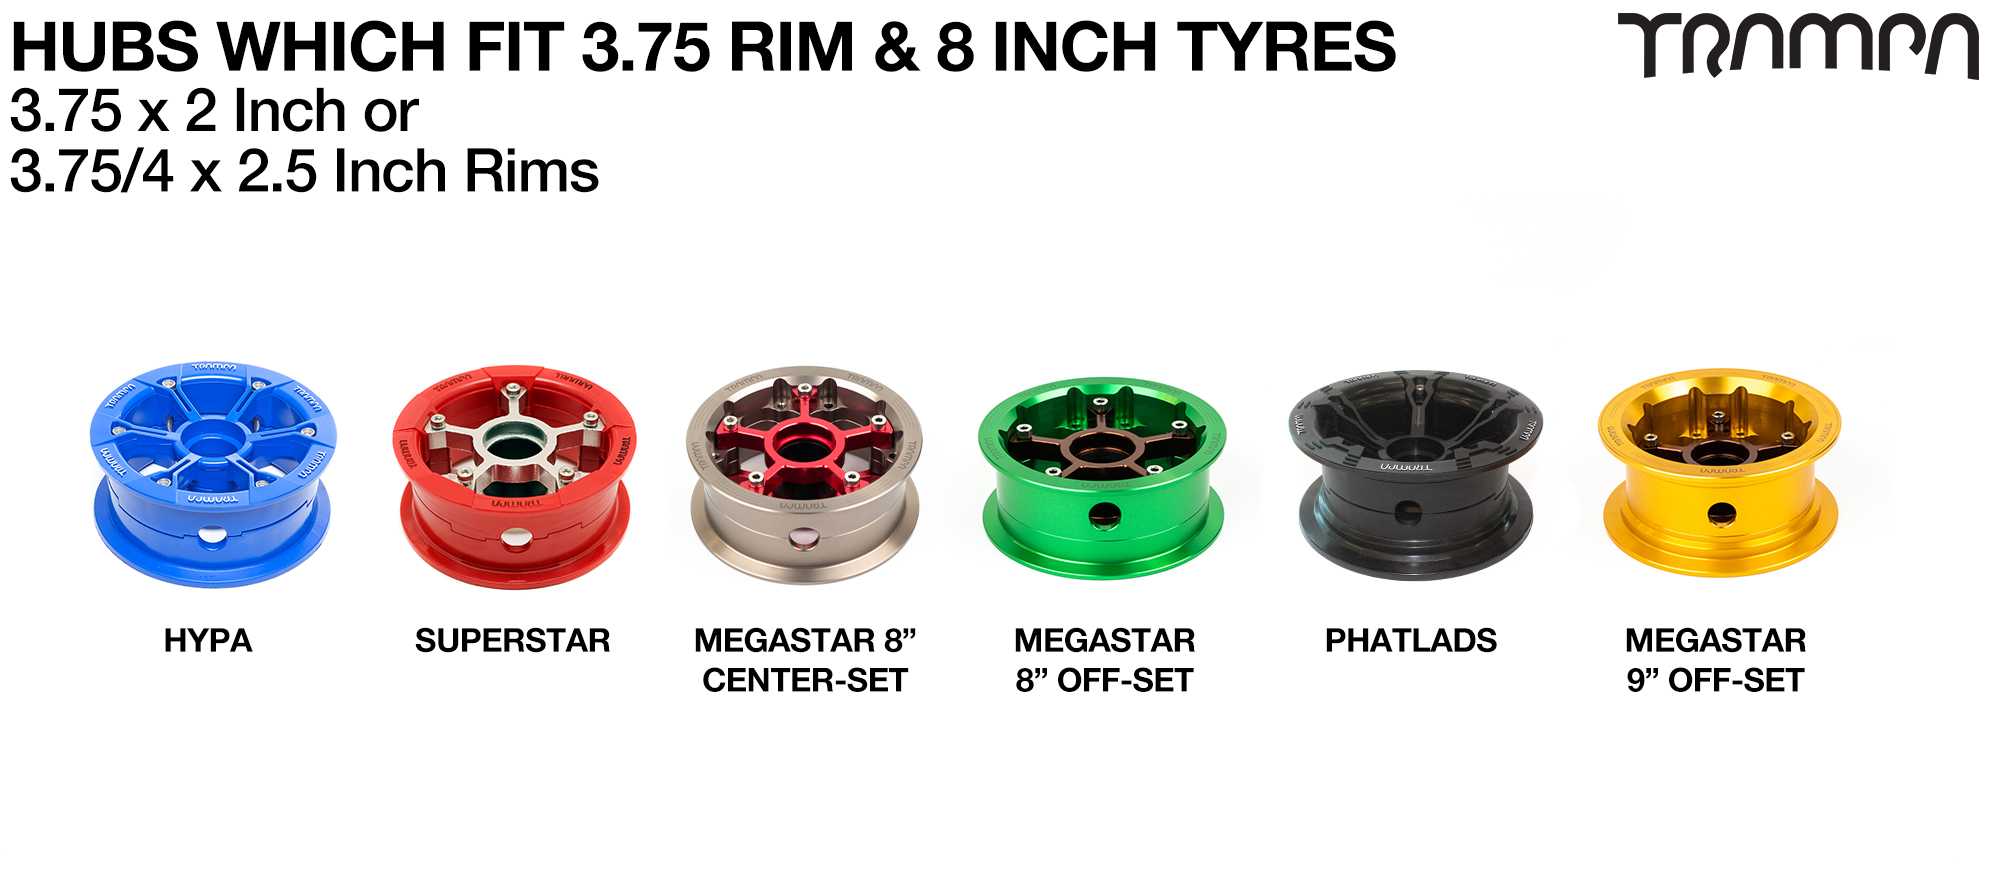 PRIMO STRIKER 8 inch Tyre measure 3.75x 2x 8 Inch or 200x50mm with 3.75 inch Rim fits all 3.75 inch Hubs